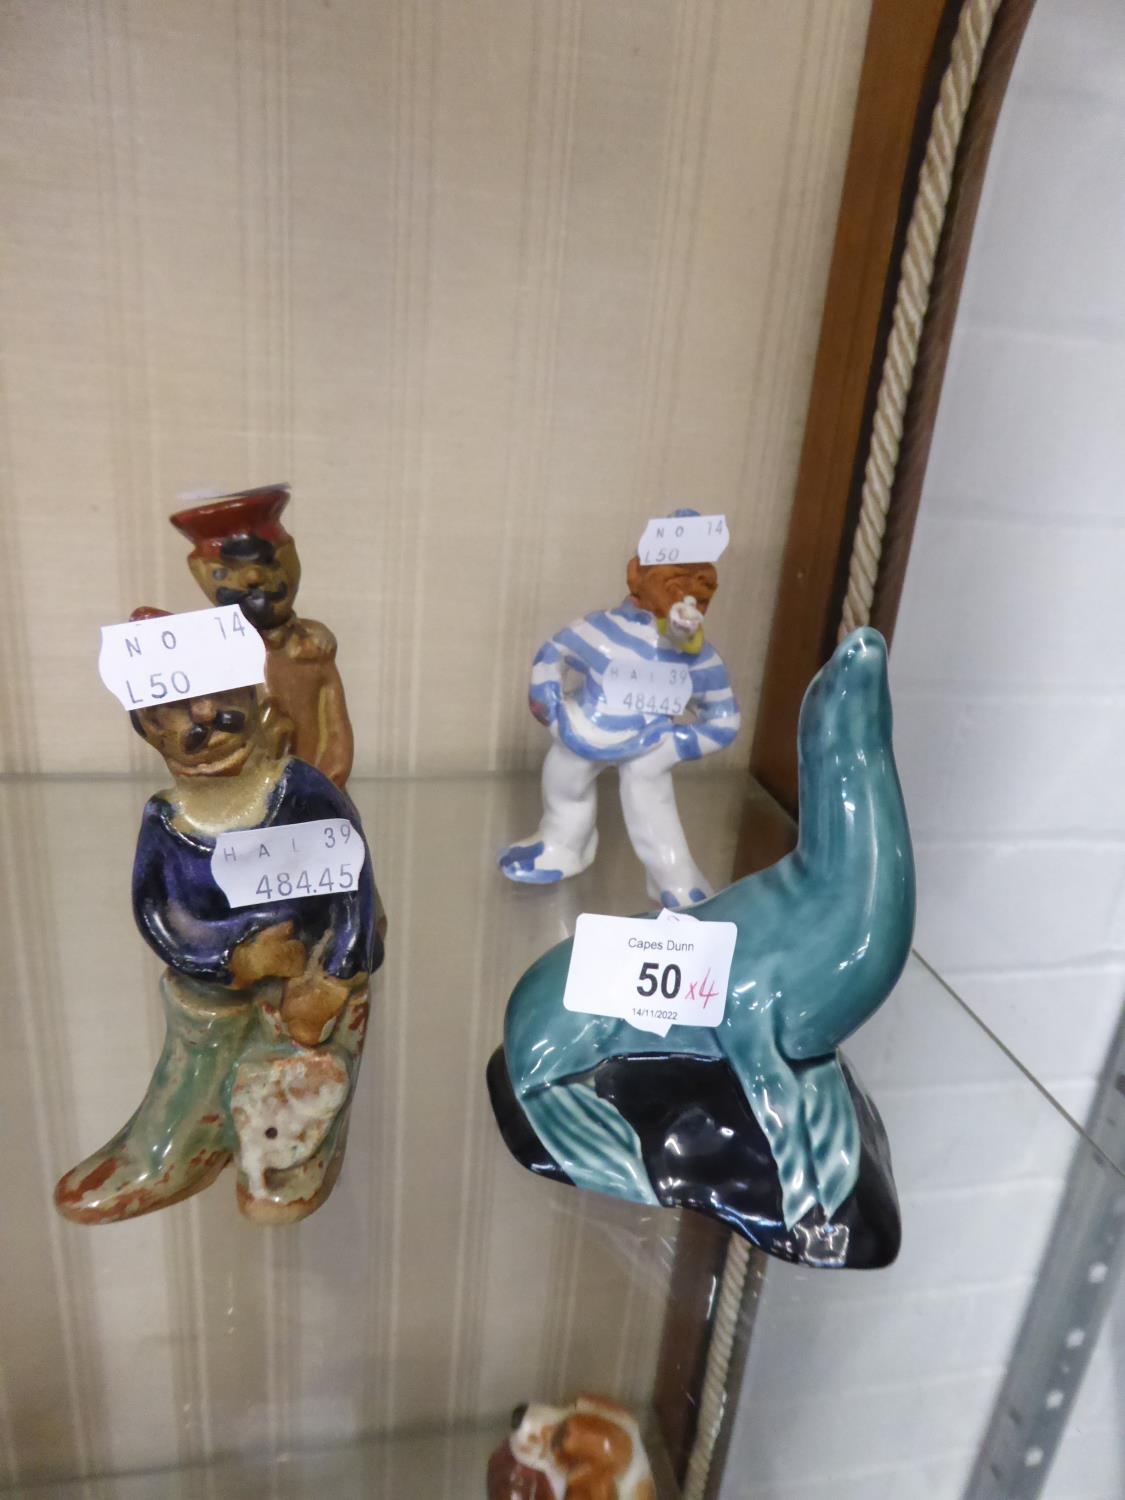 POOLE GREEN GLAZED POTTERY MODEL OF A SEAL; TINTAGEL STUDIO POTTERY FIGURE OF A SAILOR AND A TWO